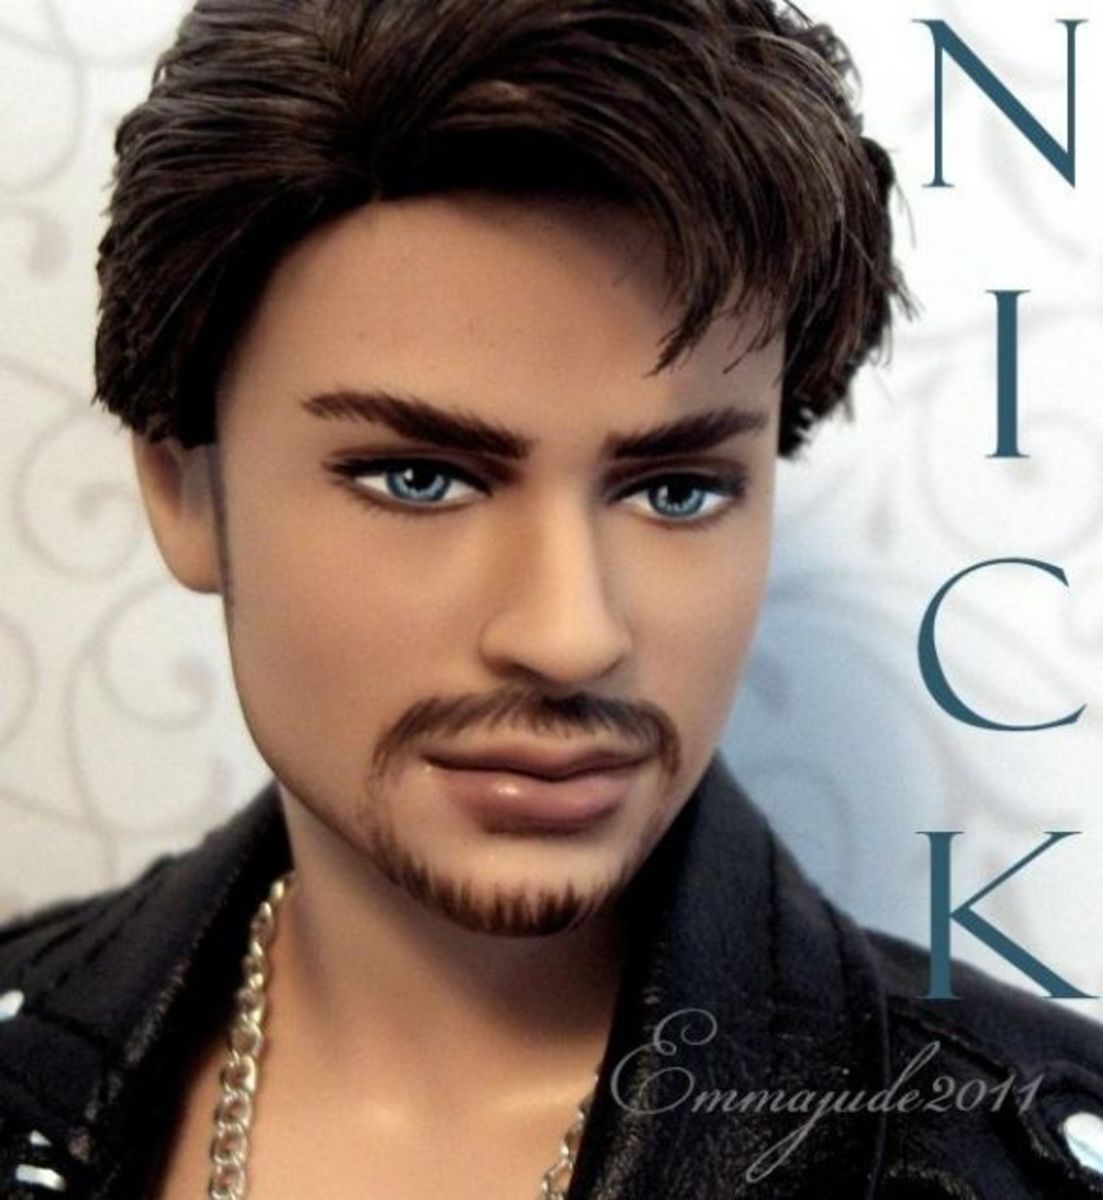 TV Dolls - The Young and Restless "Nick" by EmmaJude